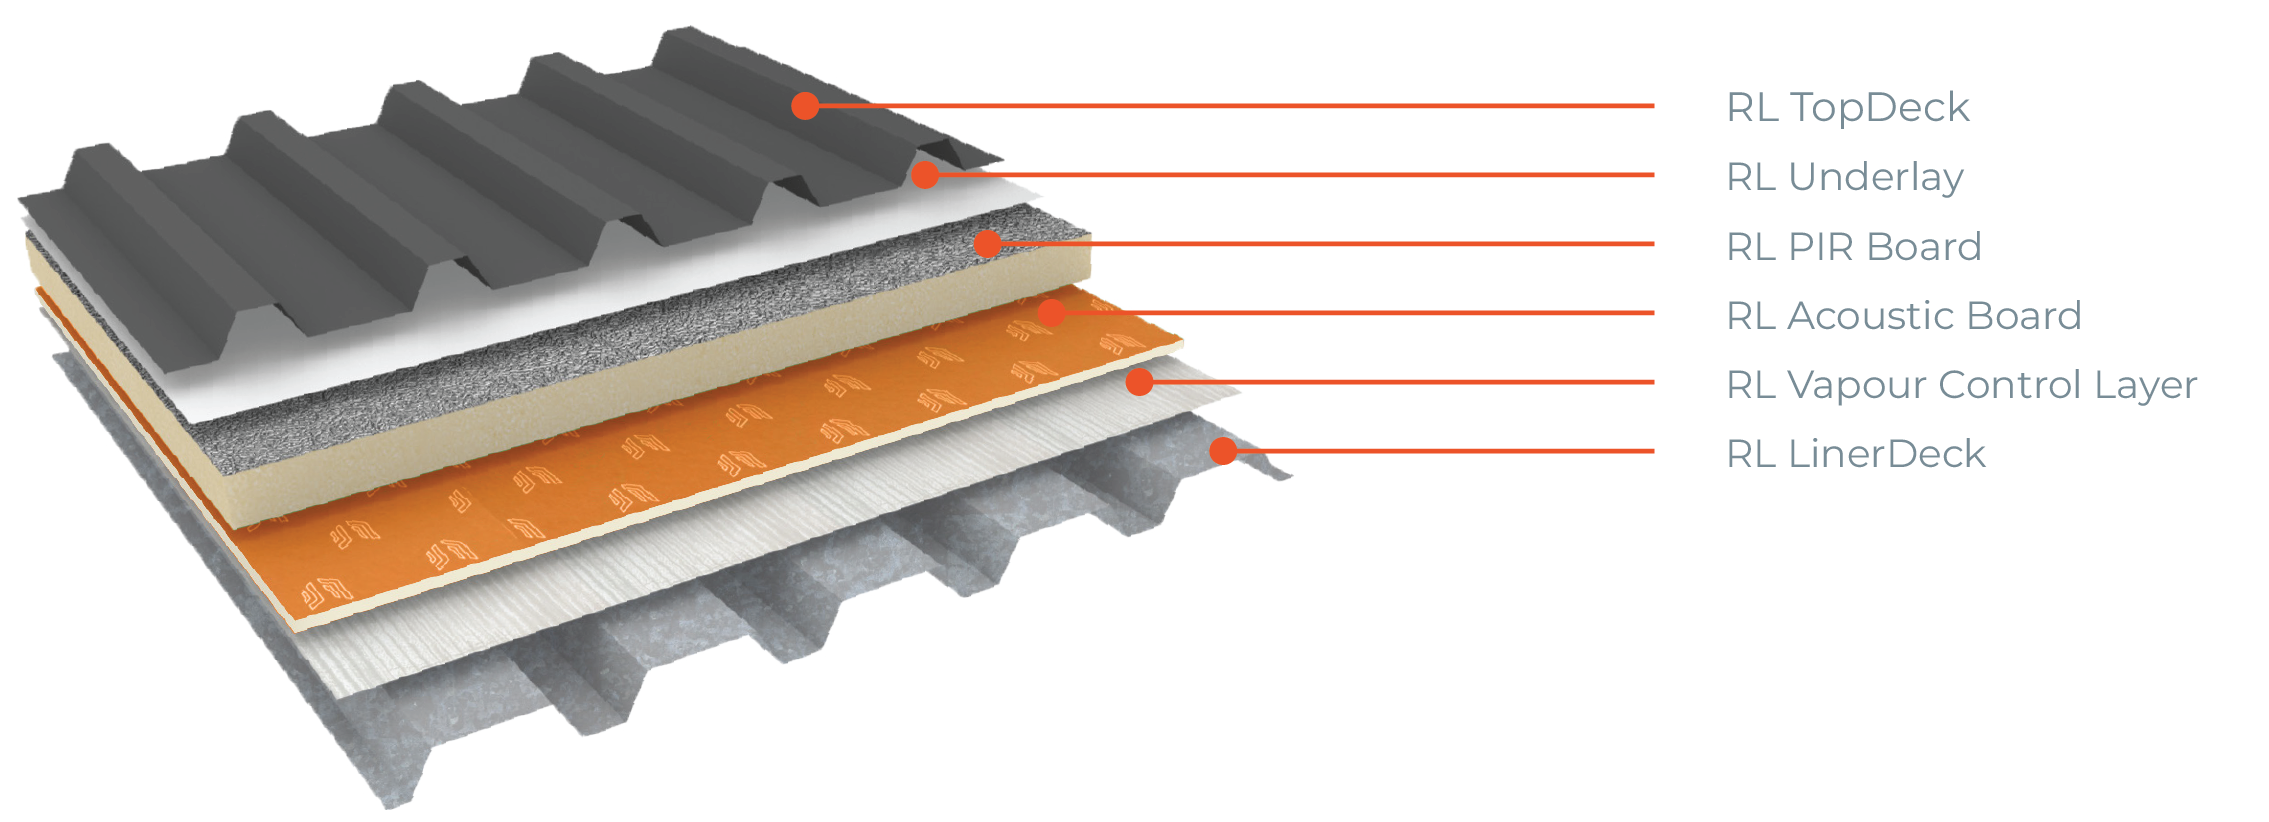 Ultratherm MSR assembly for warm roof systems